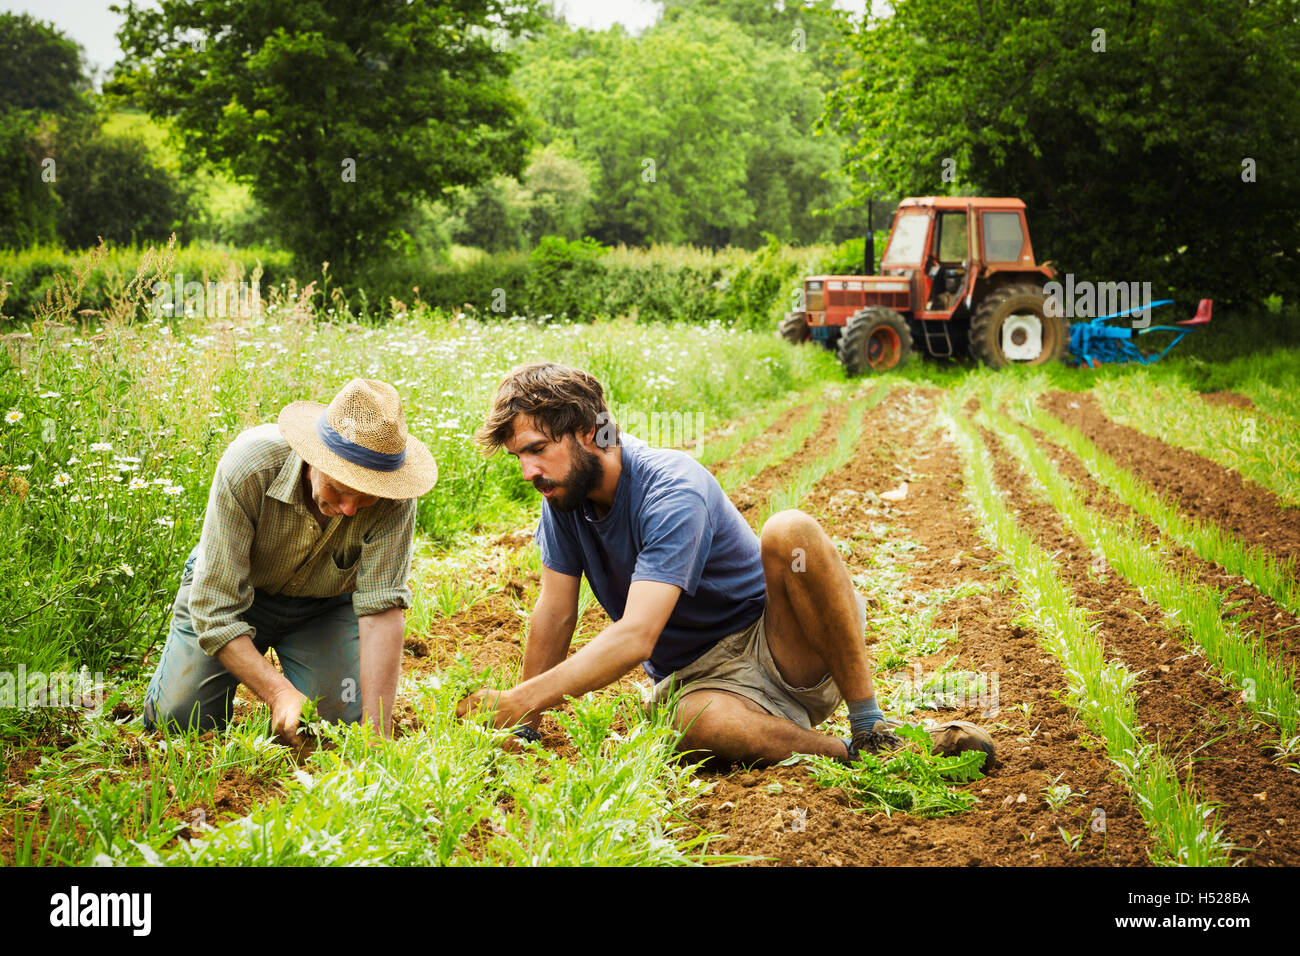 Two men tending rows of small plants in a field. Stock Photo